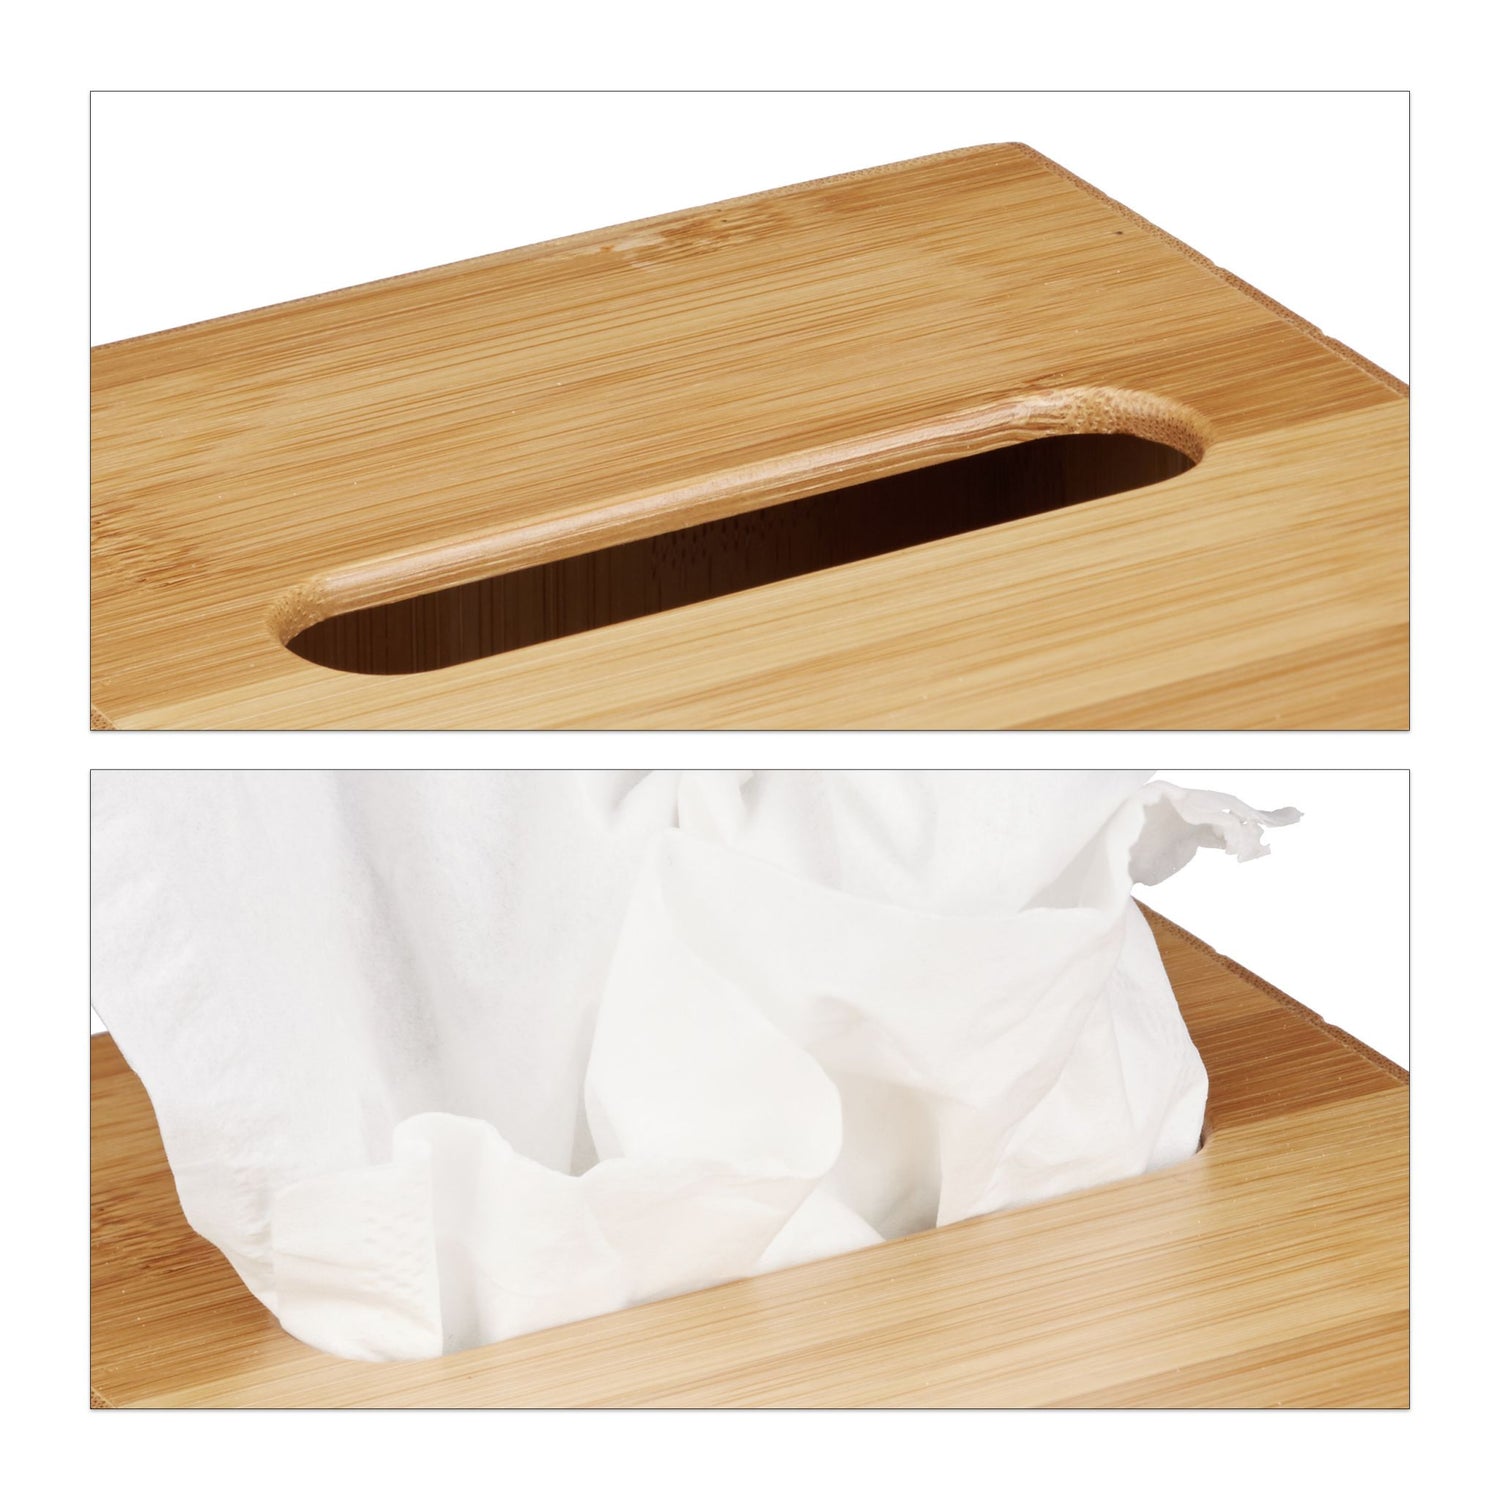 Relaxdays Square Facial Tissue Box, Wooden Bamboo Cosmetic Tissue Dispenser Cover, Black